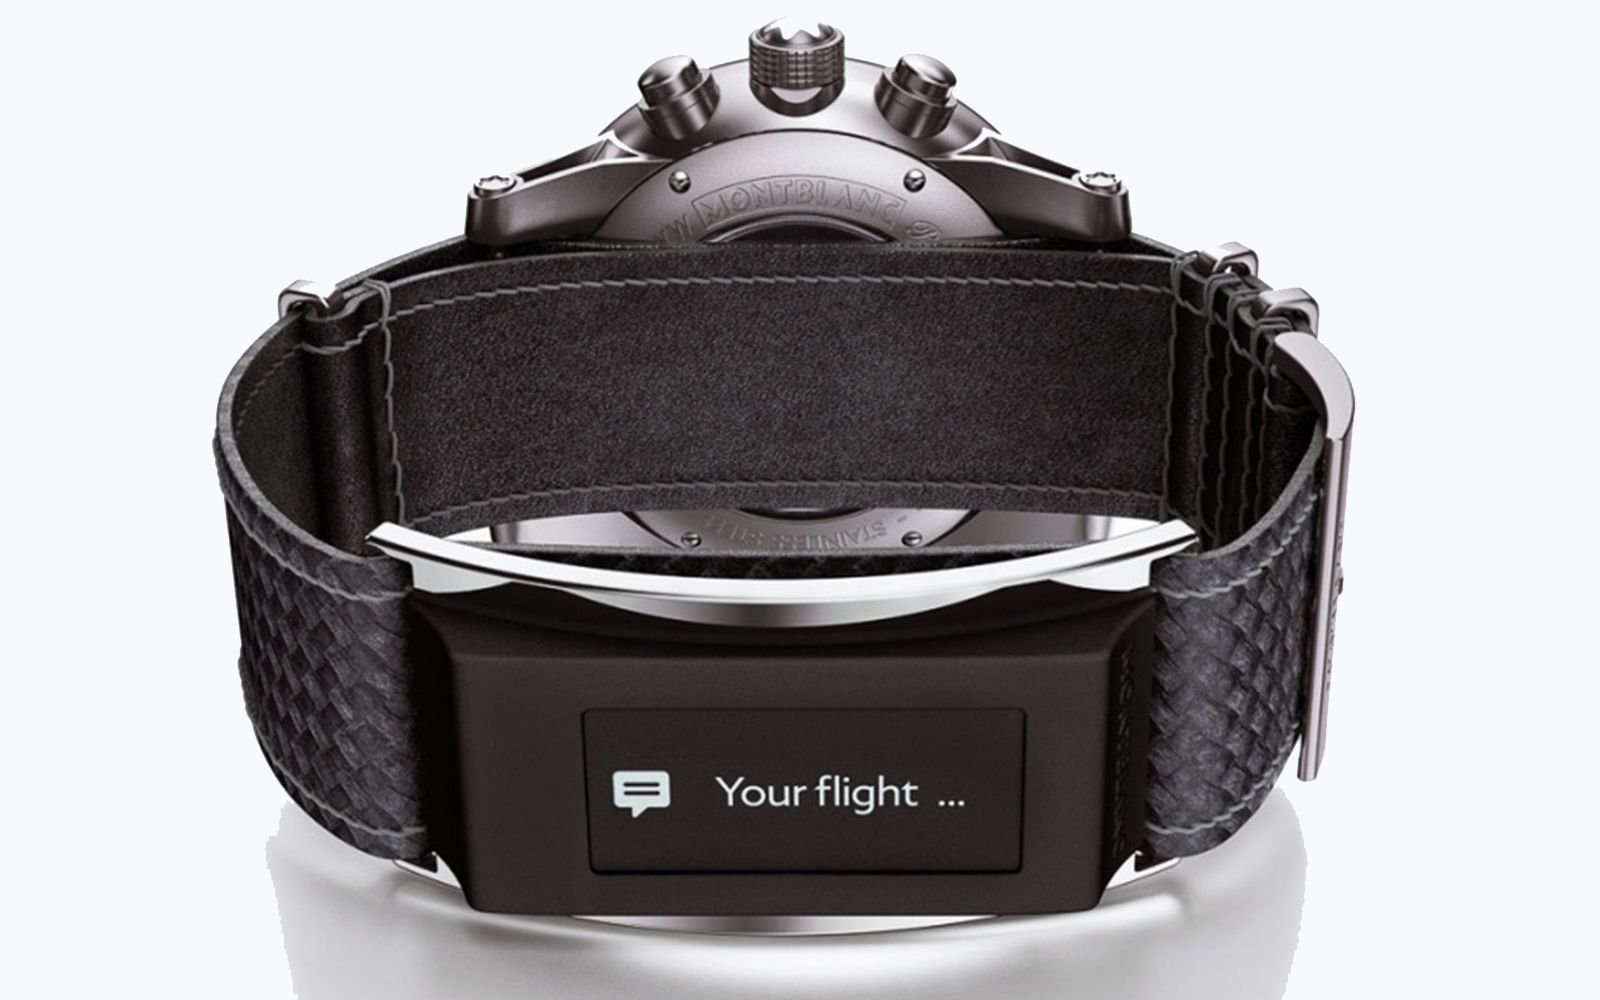 montblanc e strap lets you upgrade your current watch to make it smart image 1